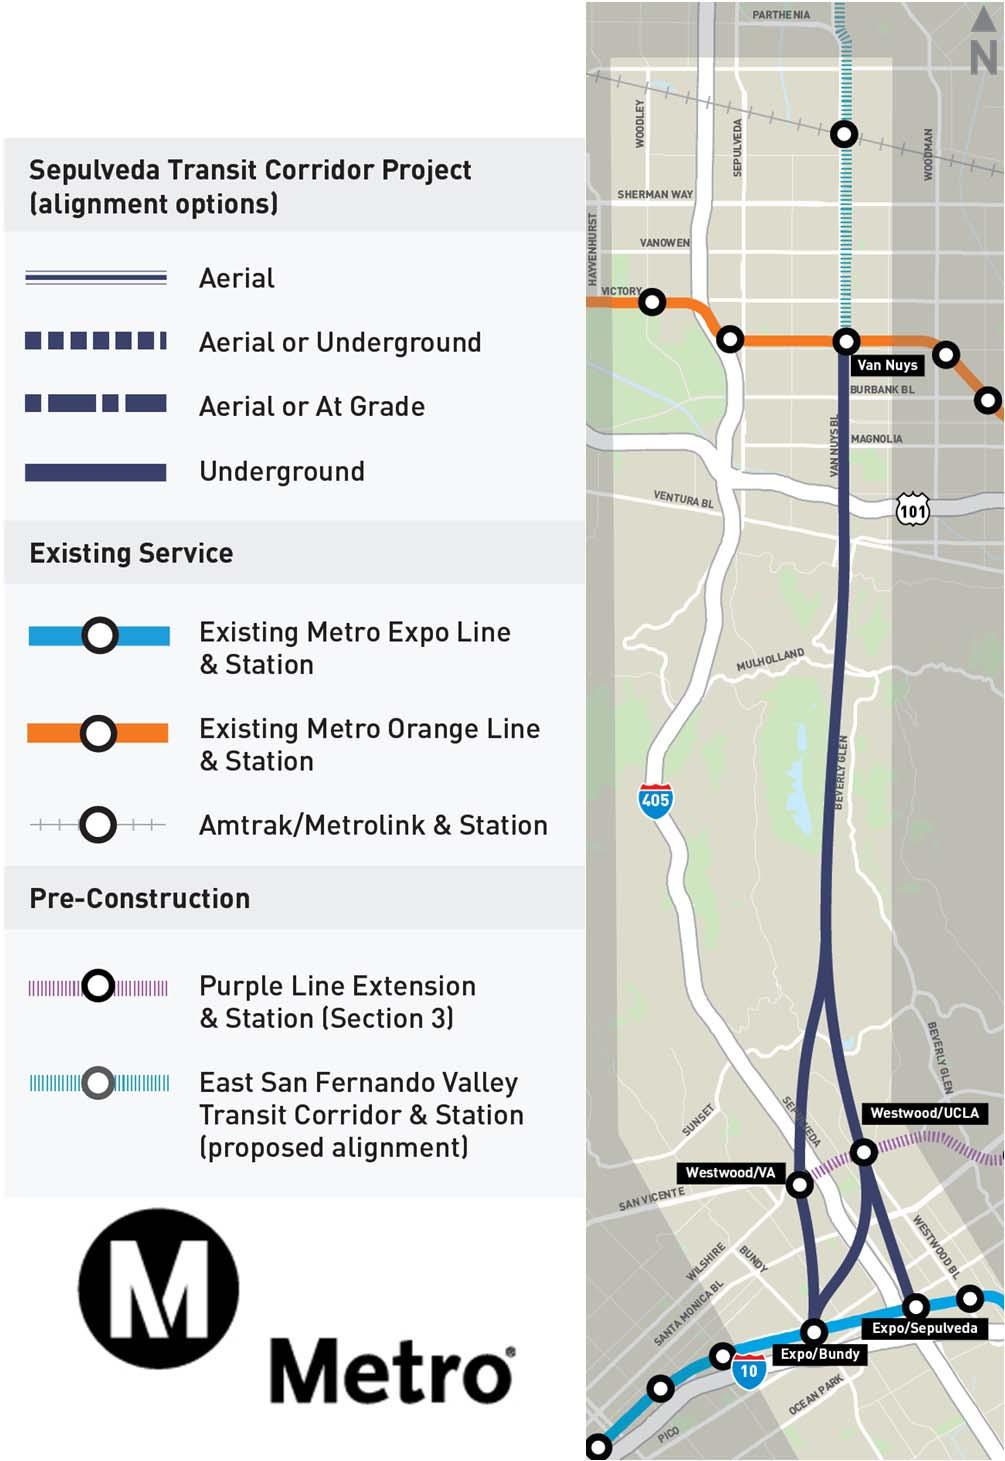 Initial Valley Westside Transit Concepts (All concepts planned to allow extension to LAX) HRT Concepts Concept